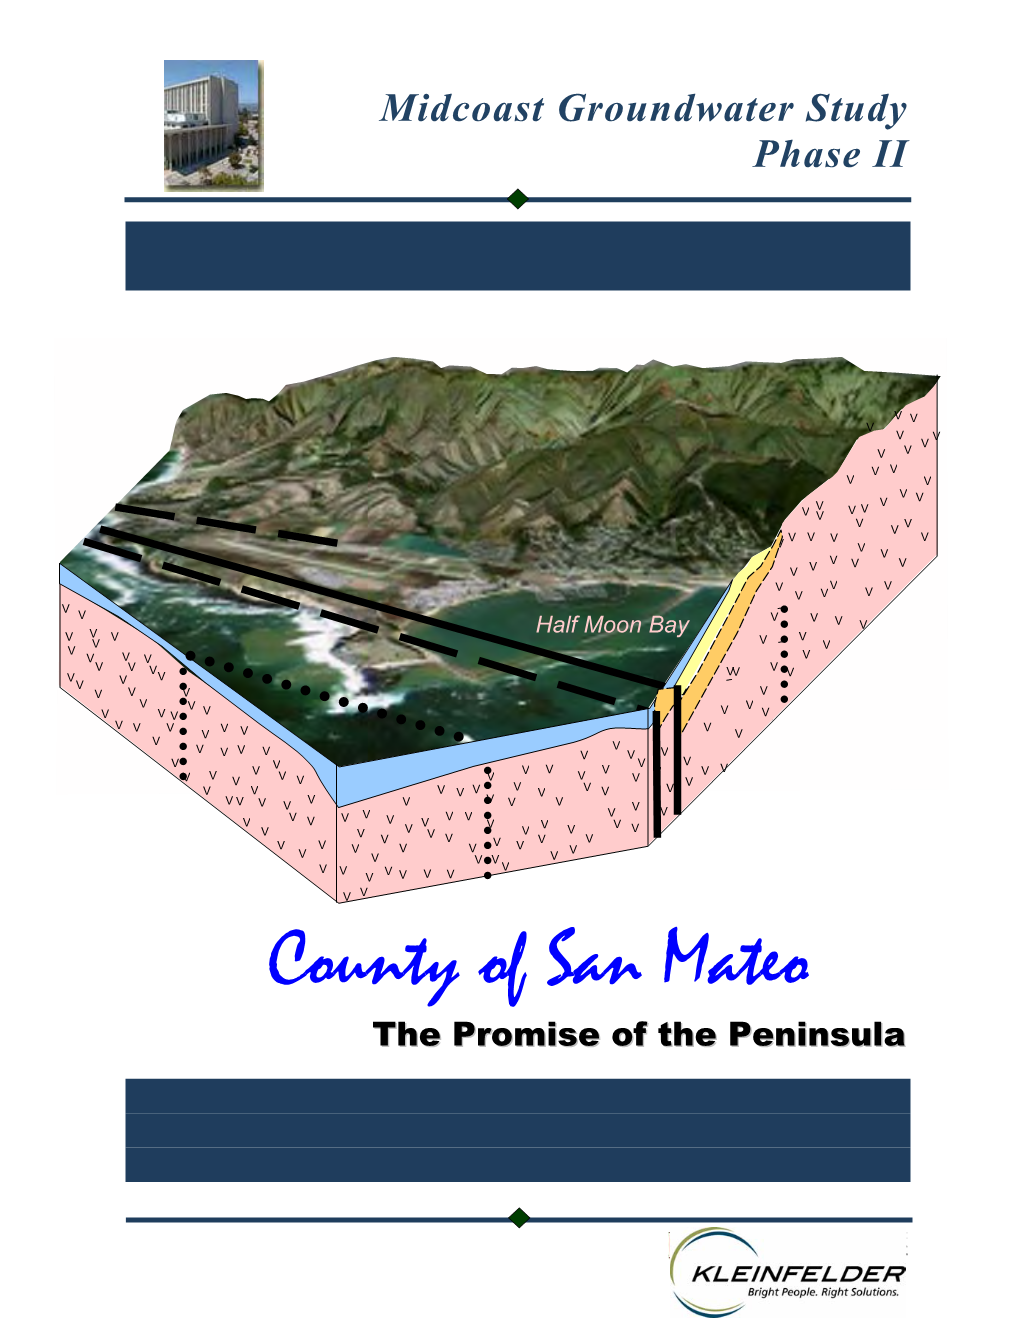 County of San Mateo the Promise of the Peninsula